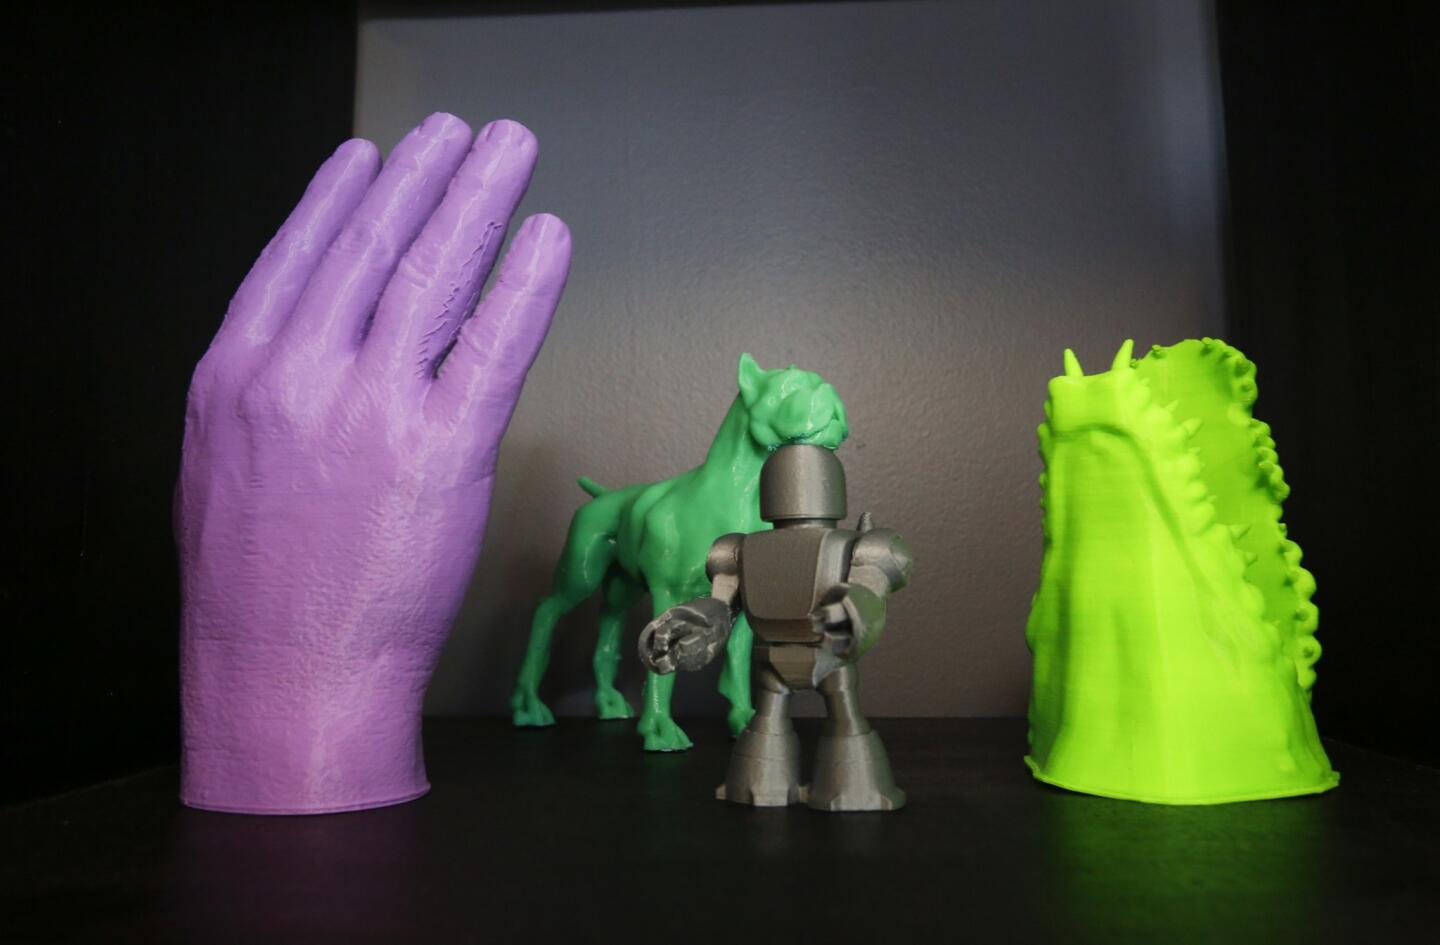 3-D printing makes its way to consumers